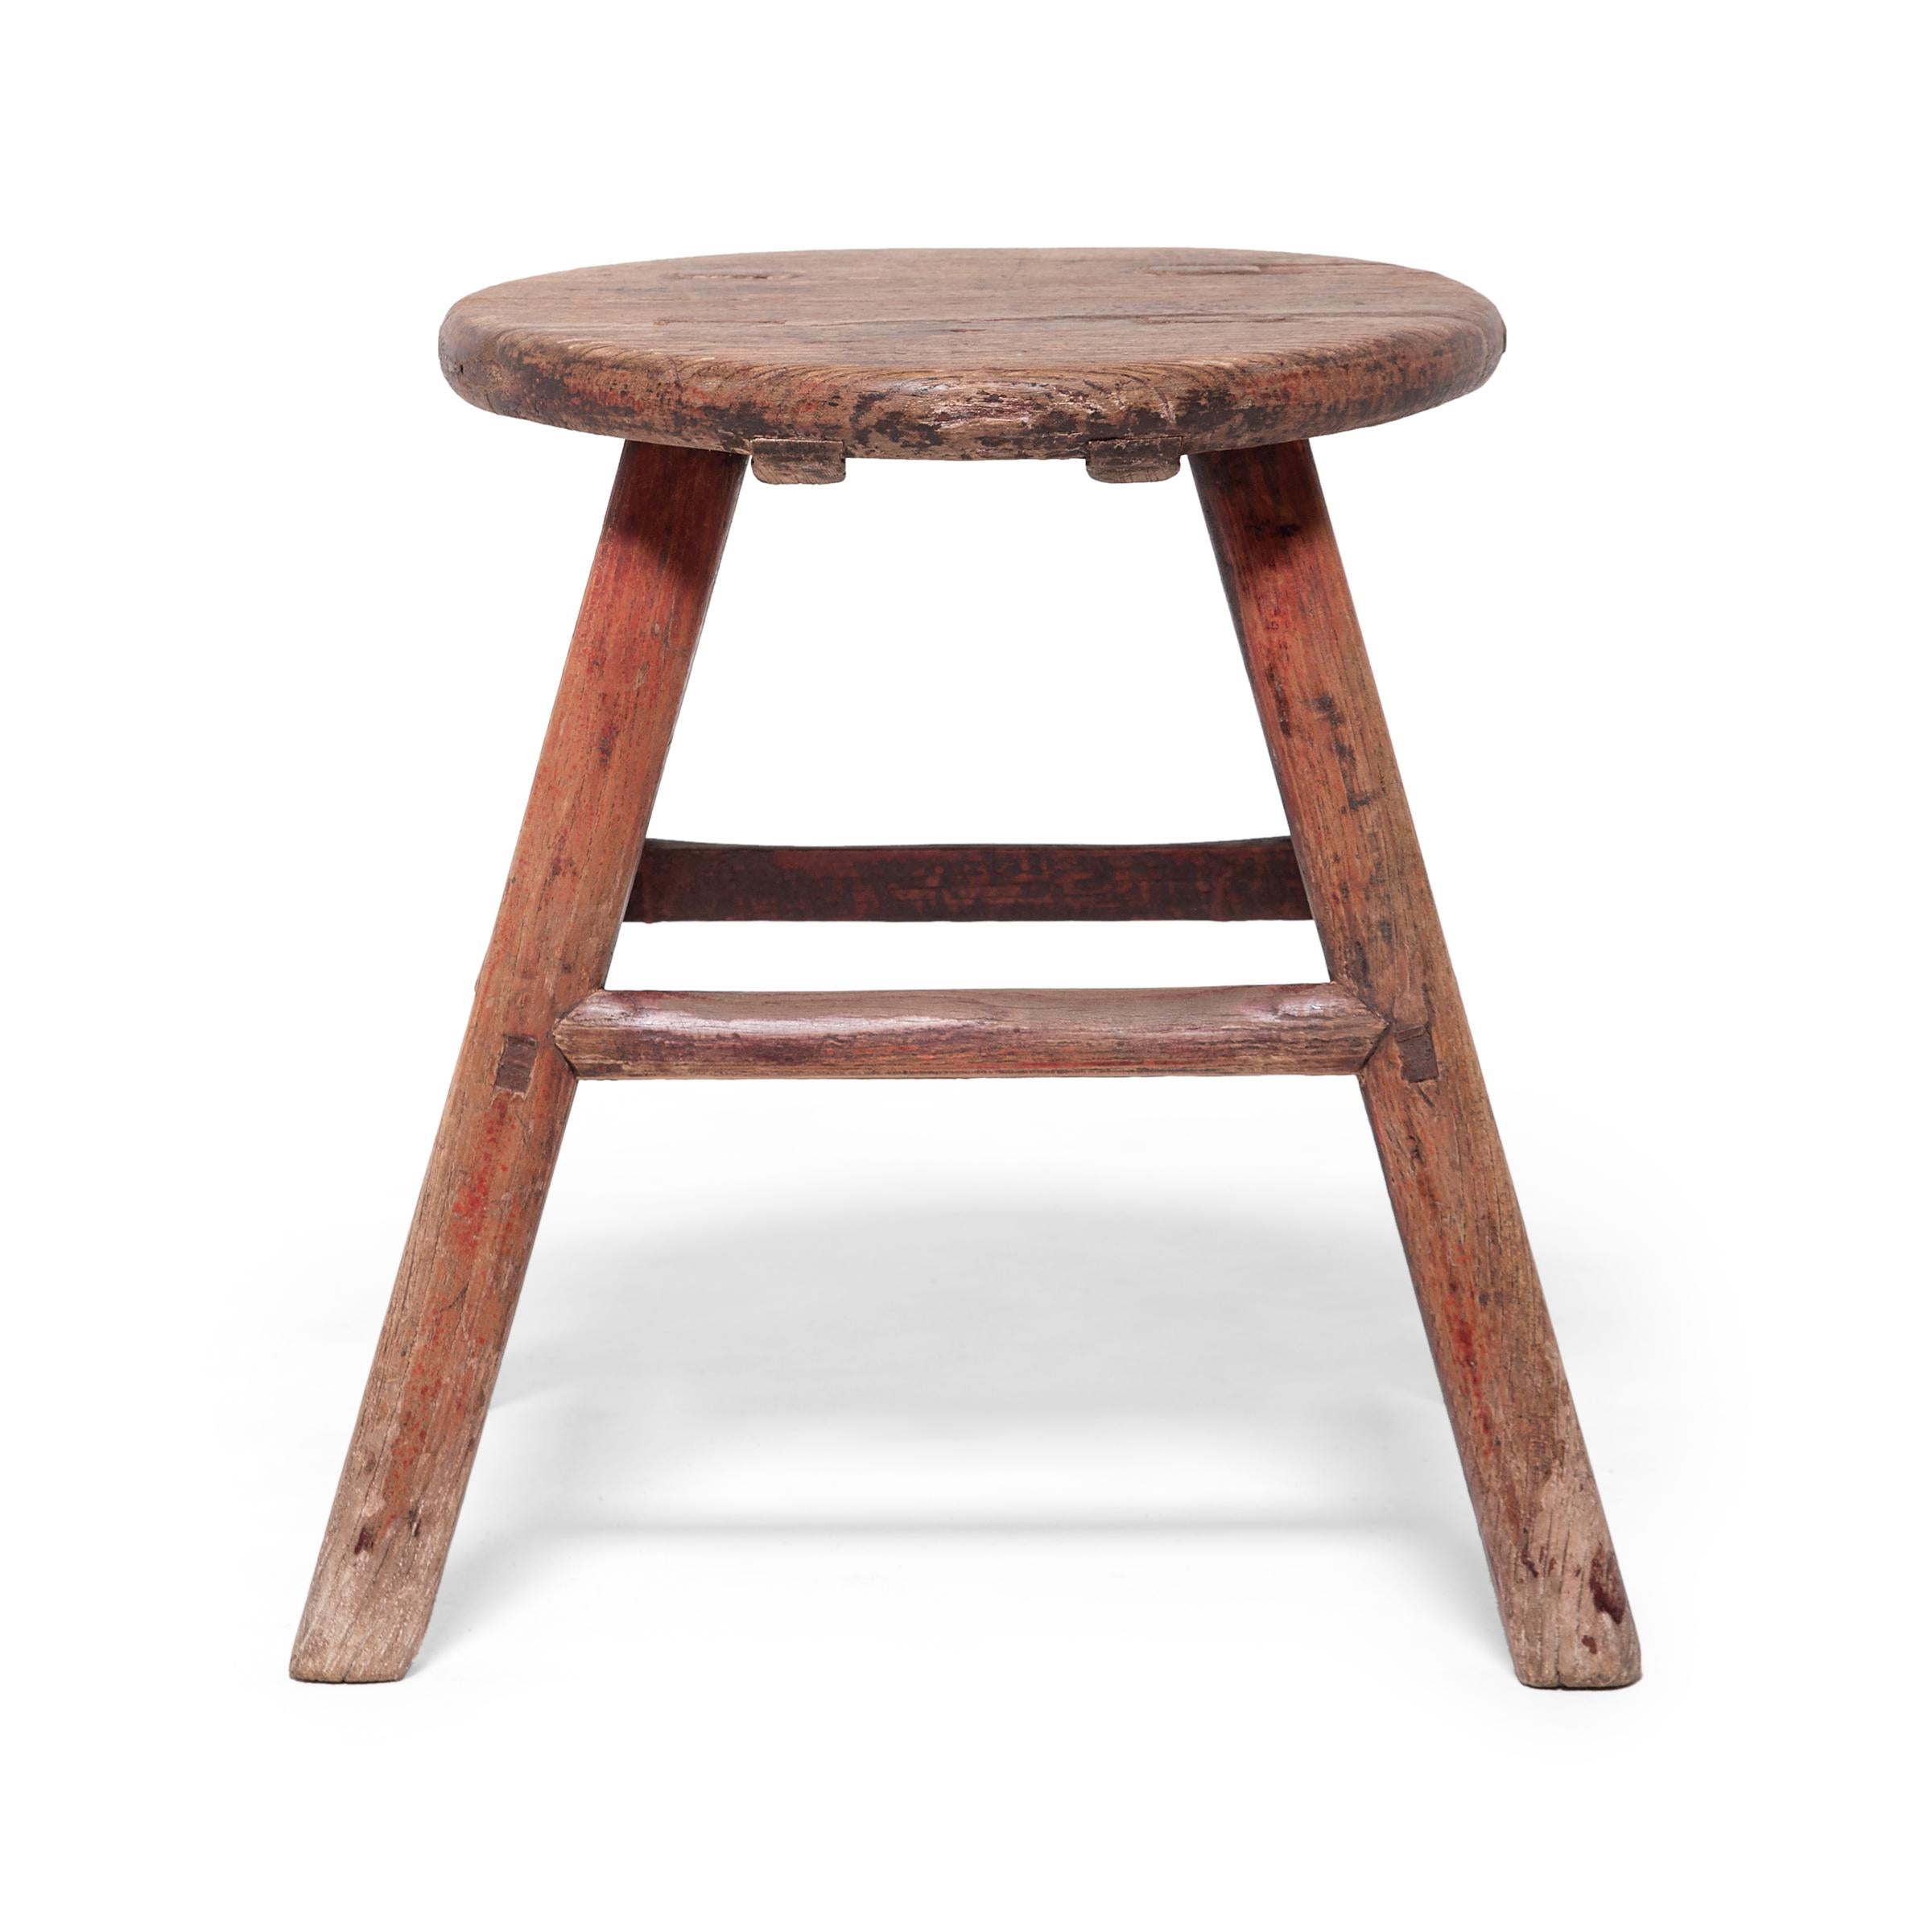 The stool is a central fixture of Chinese furniture culture. Found in a variety of materials and forms, the stool transcends class lines, as much at home in the provincial courtyard as it is in the grand hall of a wealthy estate. Whether worked from